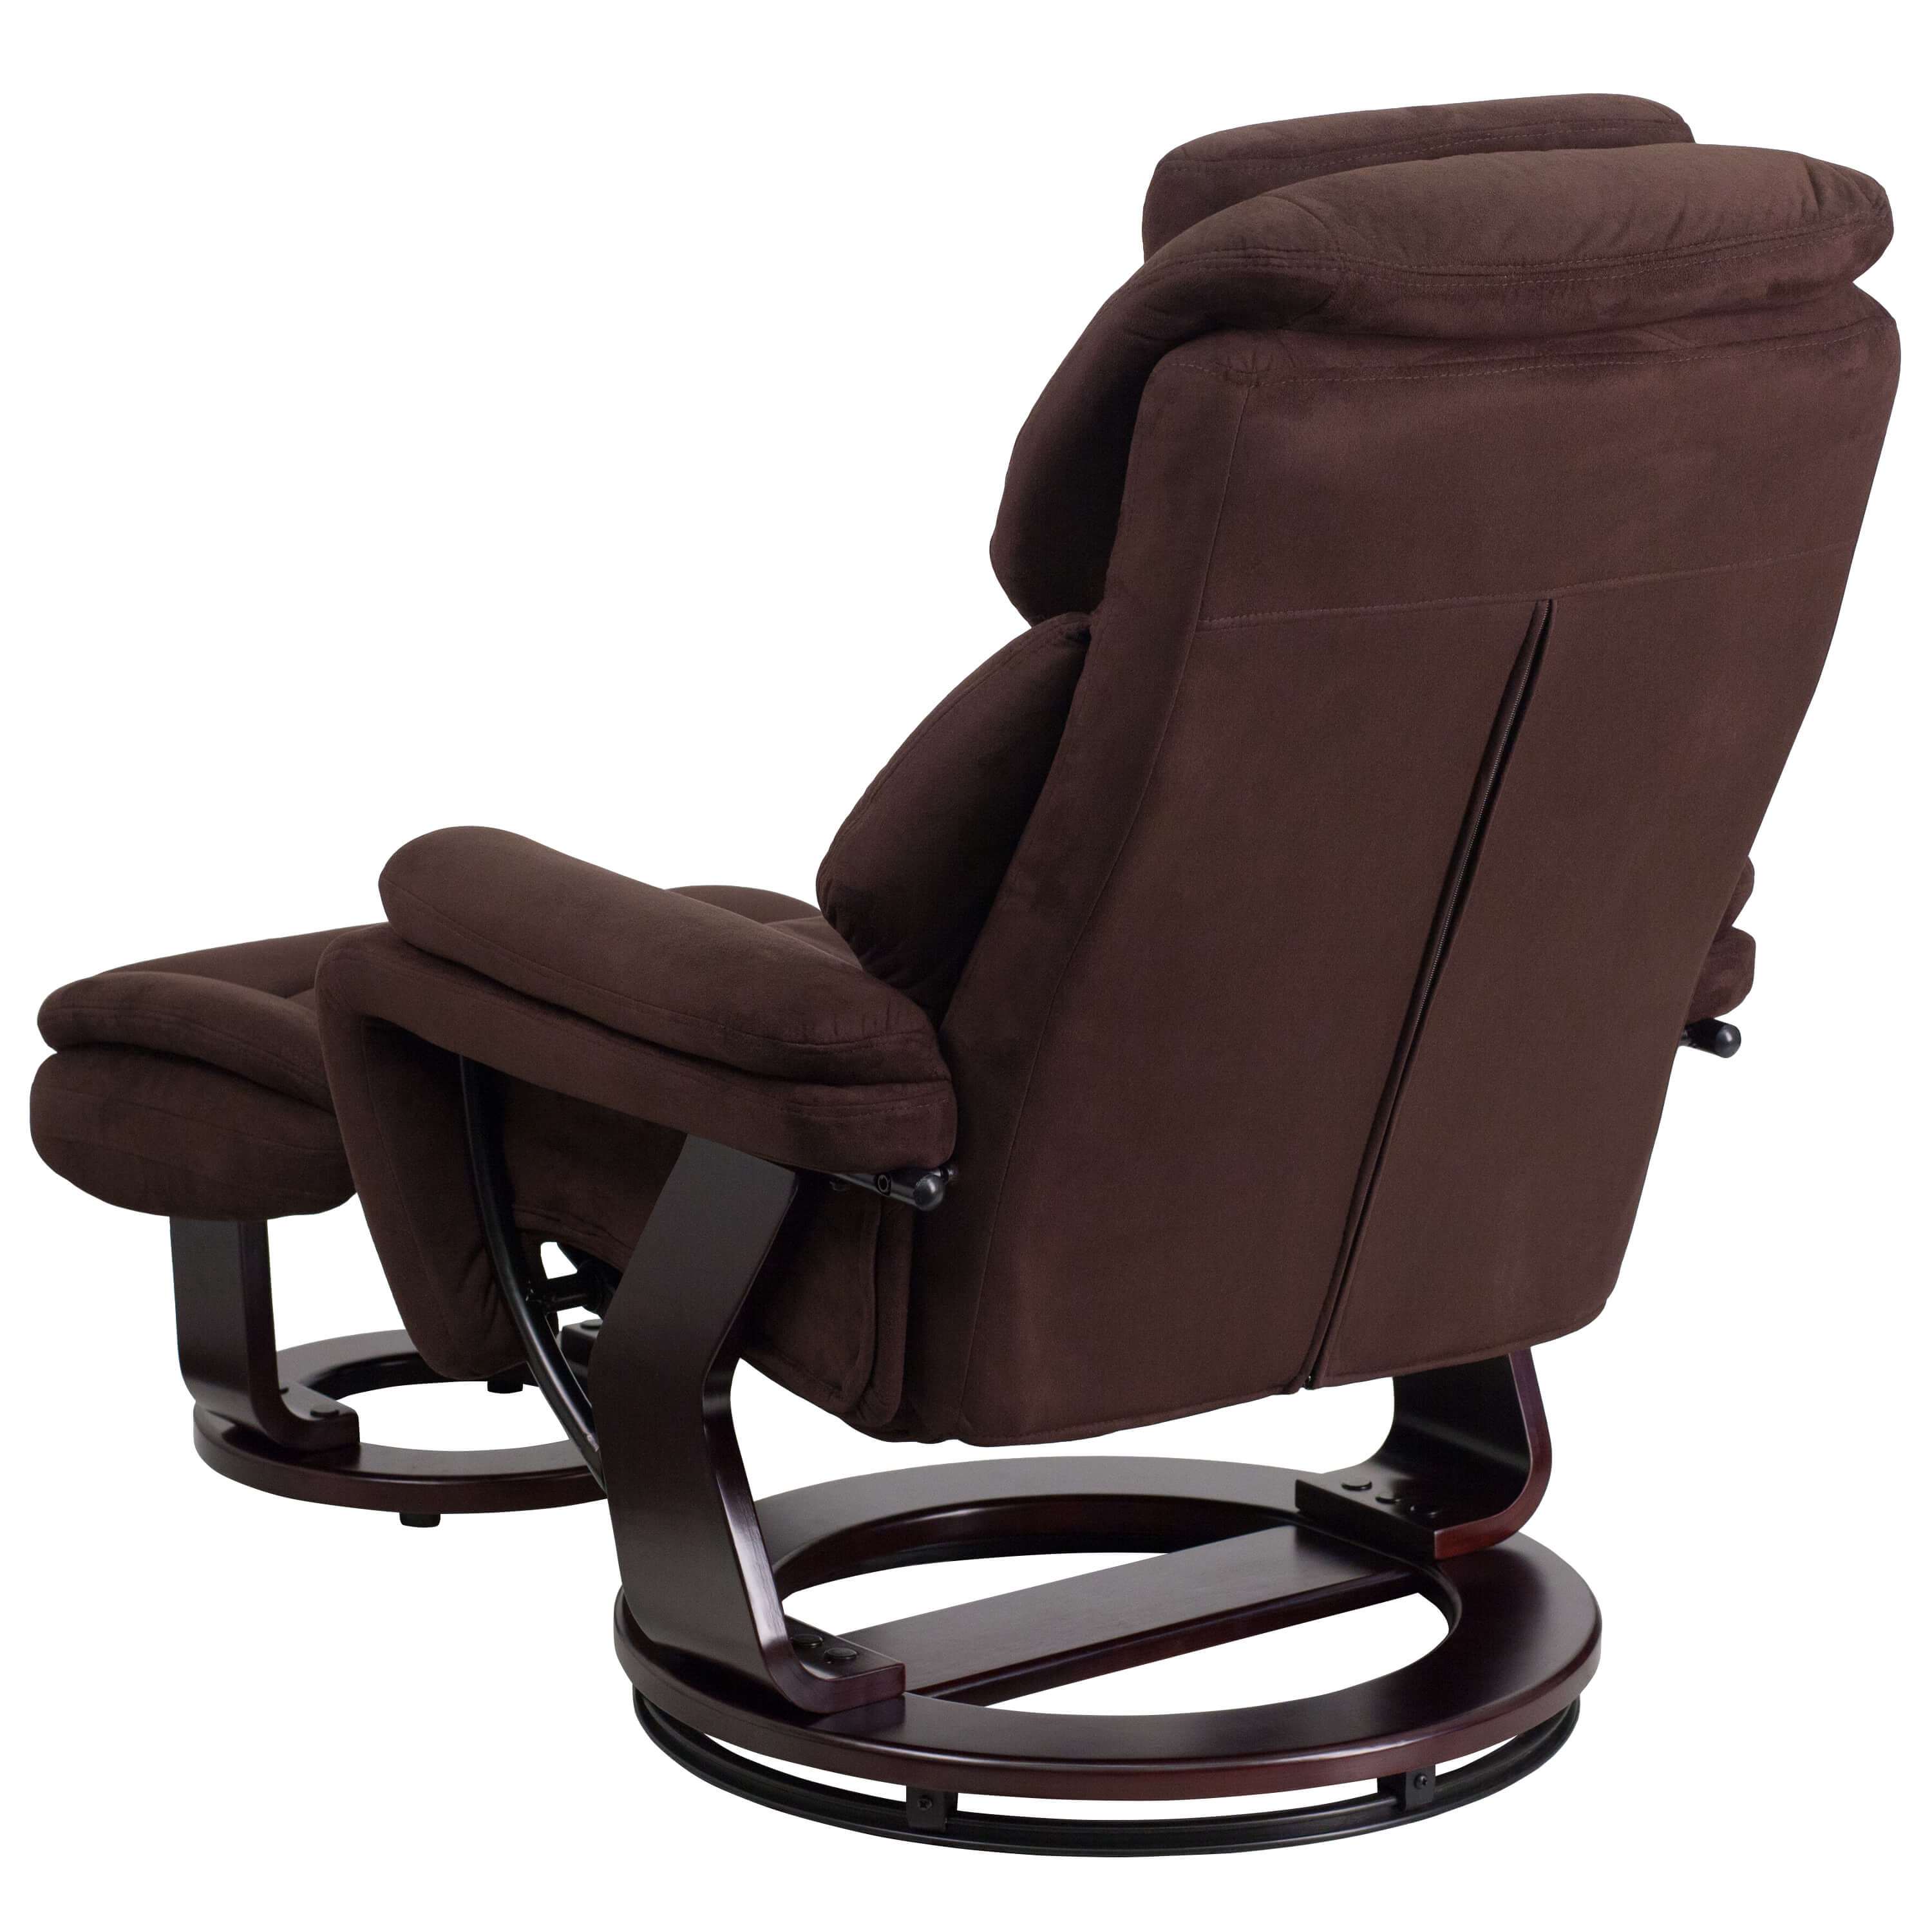 Brown recliner back view